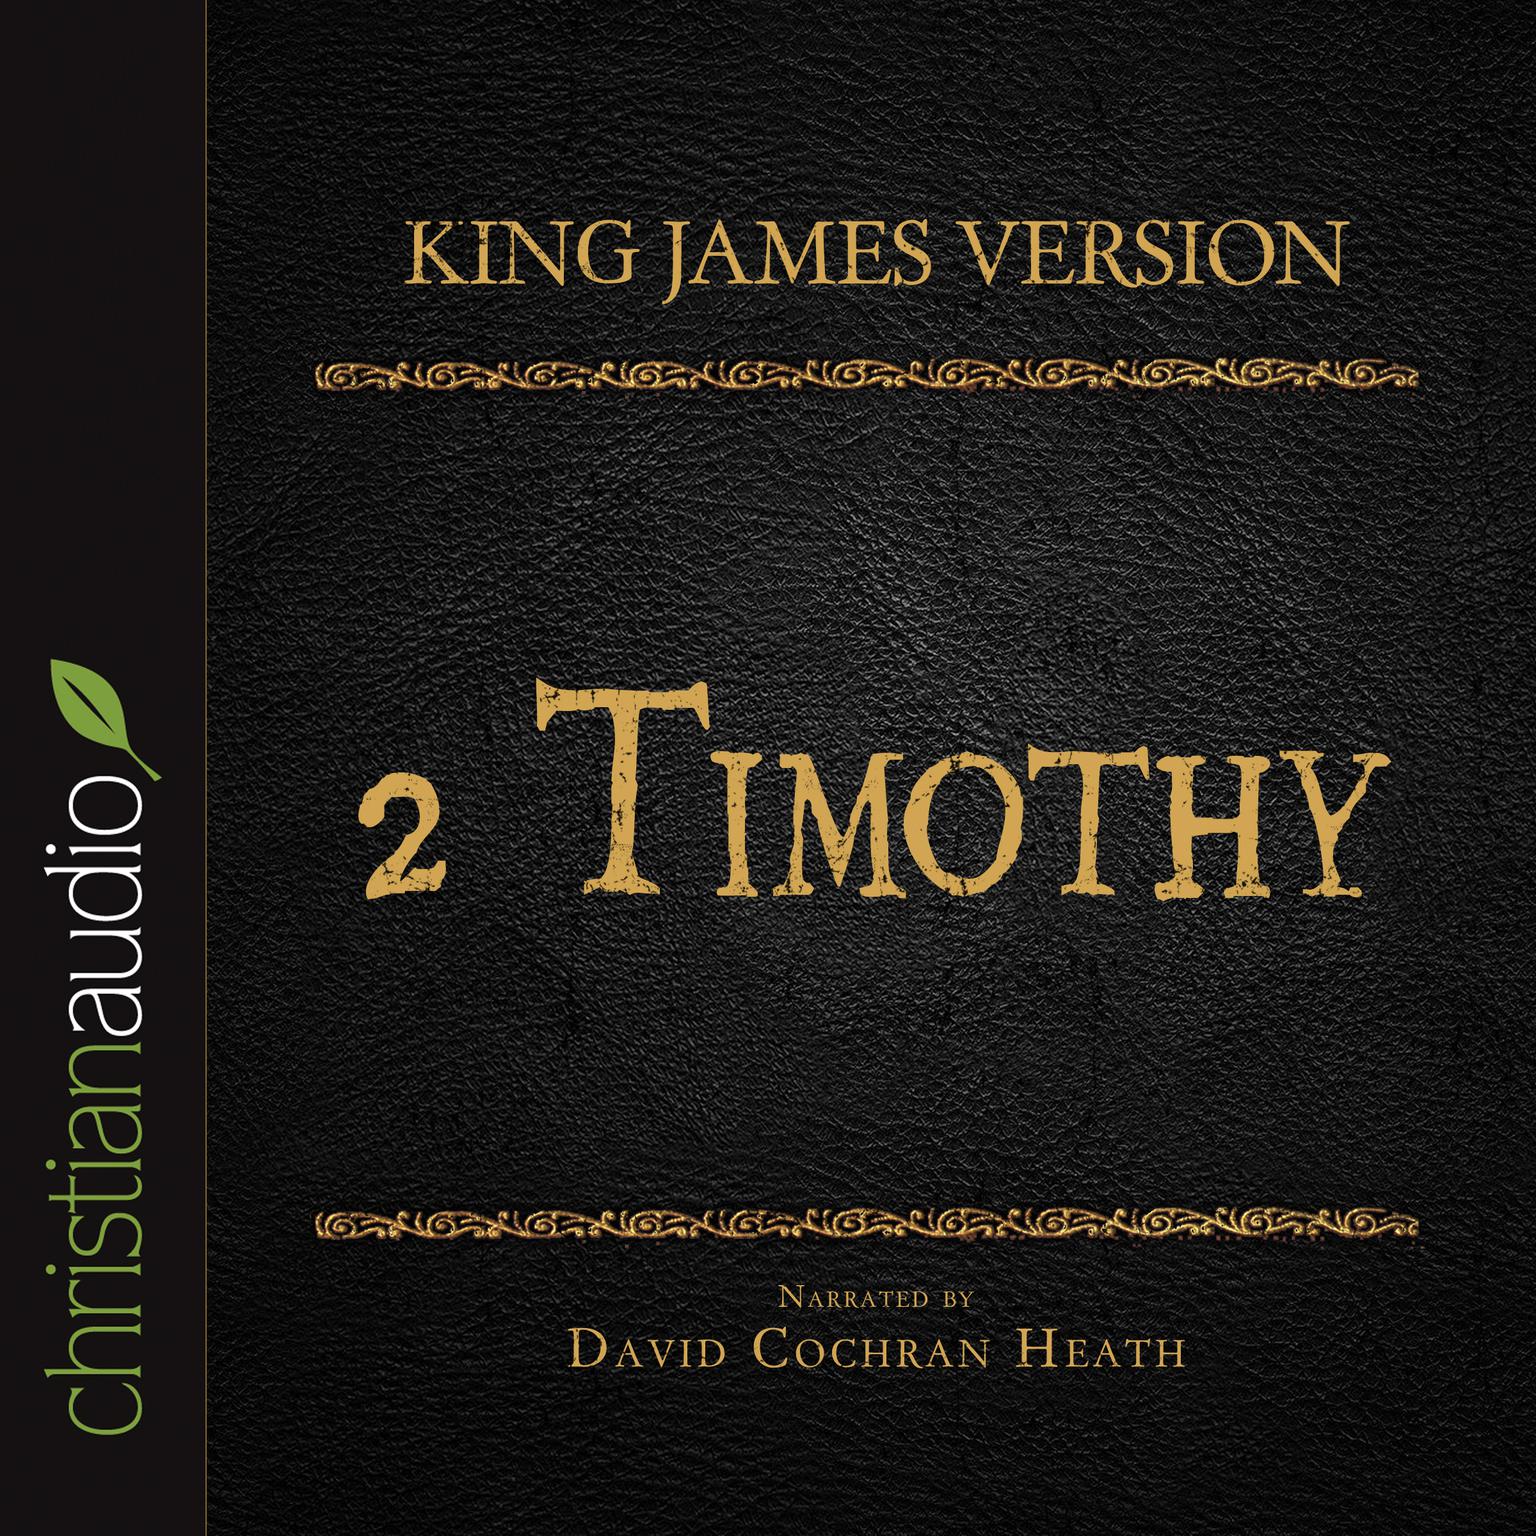 Holy Bible in Audio - King James Version: 2 Timothy Audiobook, by David Cochran Heath